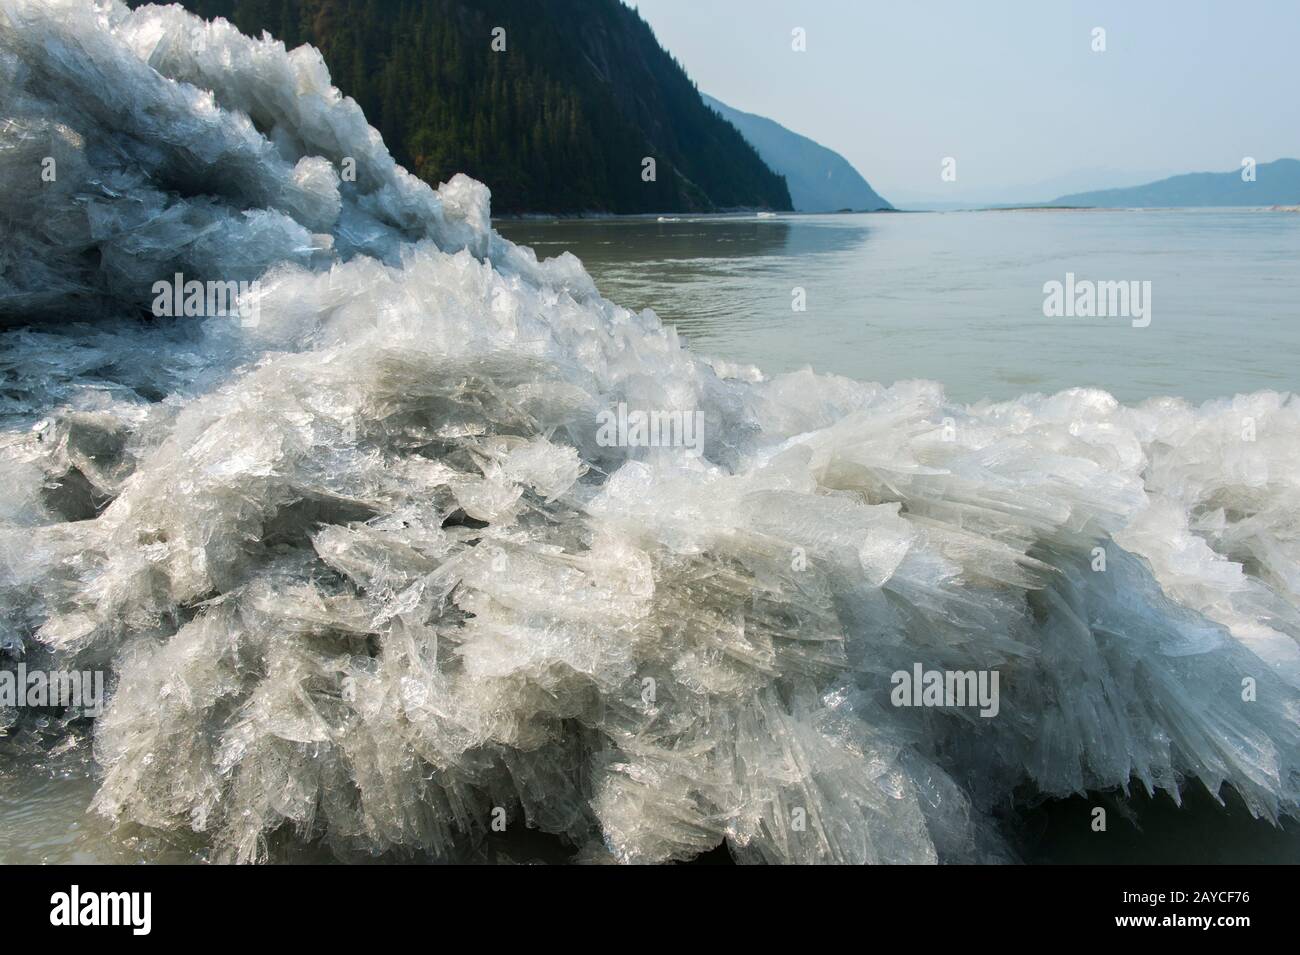 Melting ice is floating in the meltwater runoff at the Baird Glacier in Thomas Bay near Juneau, Tongass National Forest, Alaska, USA. Stock Photo